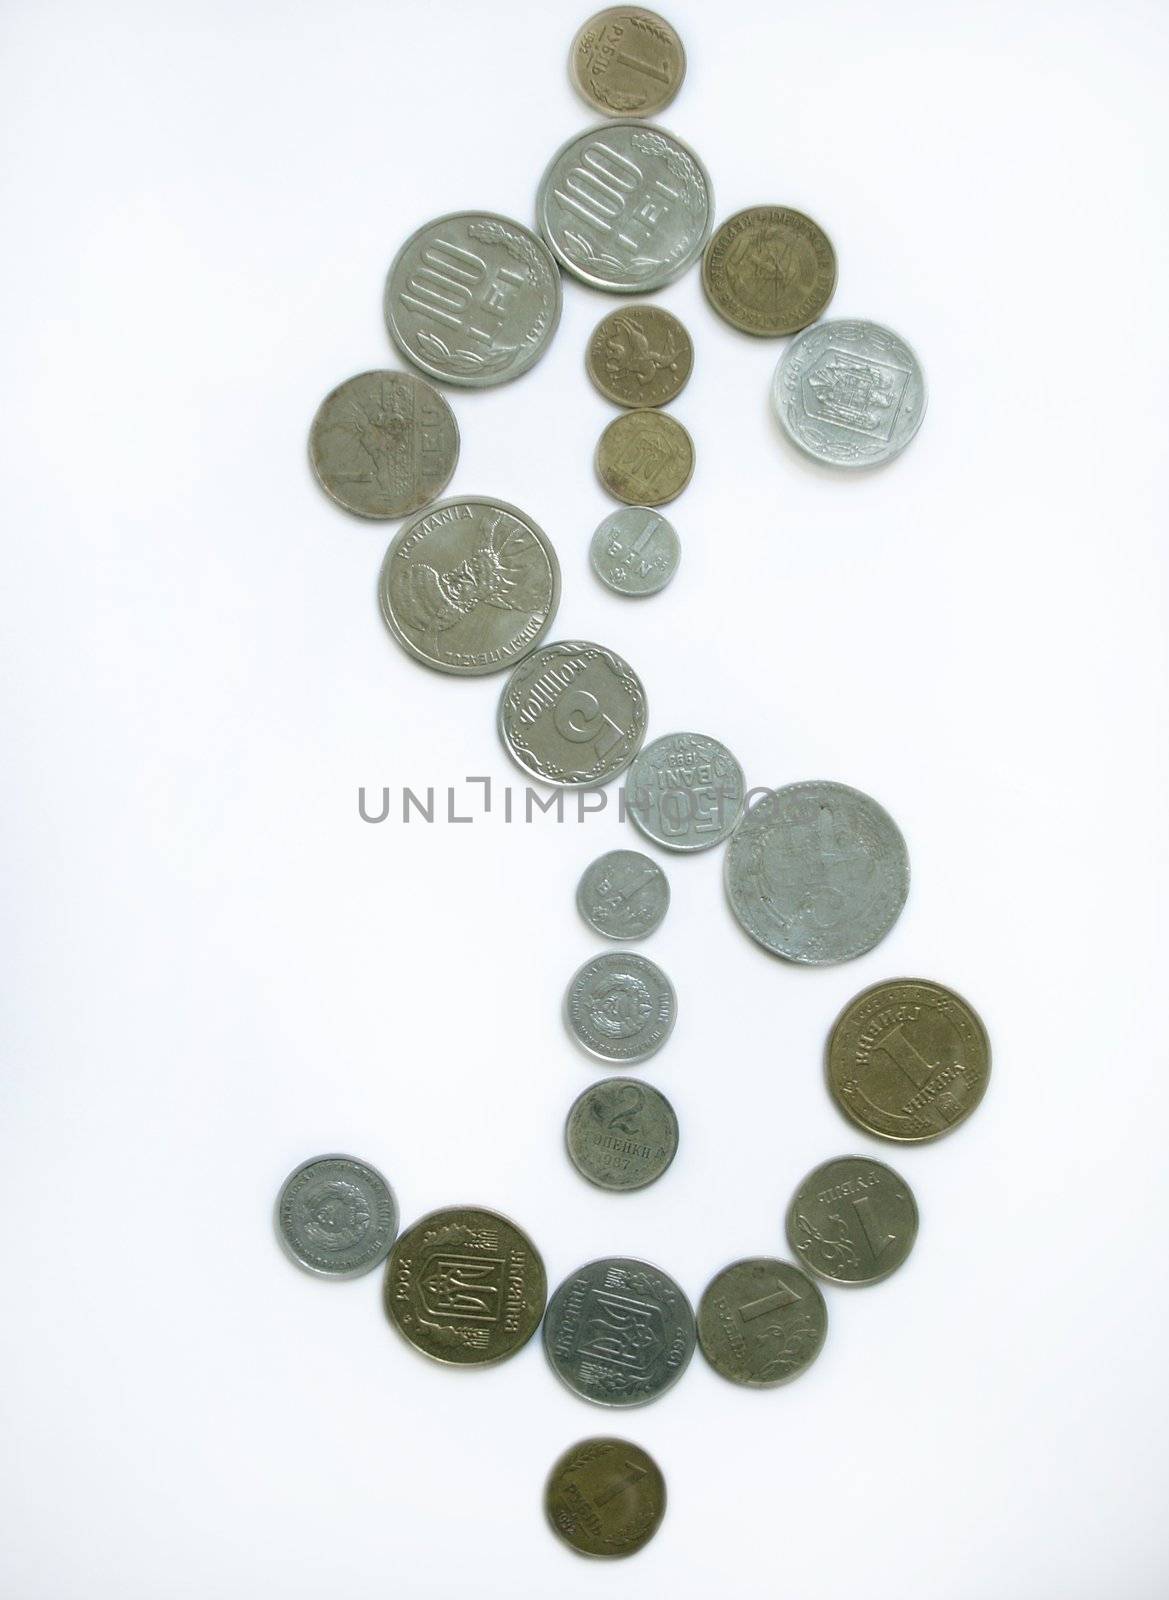 Dollar sign made from coins